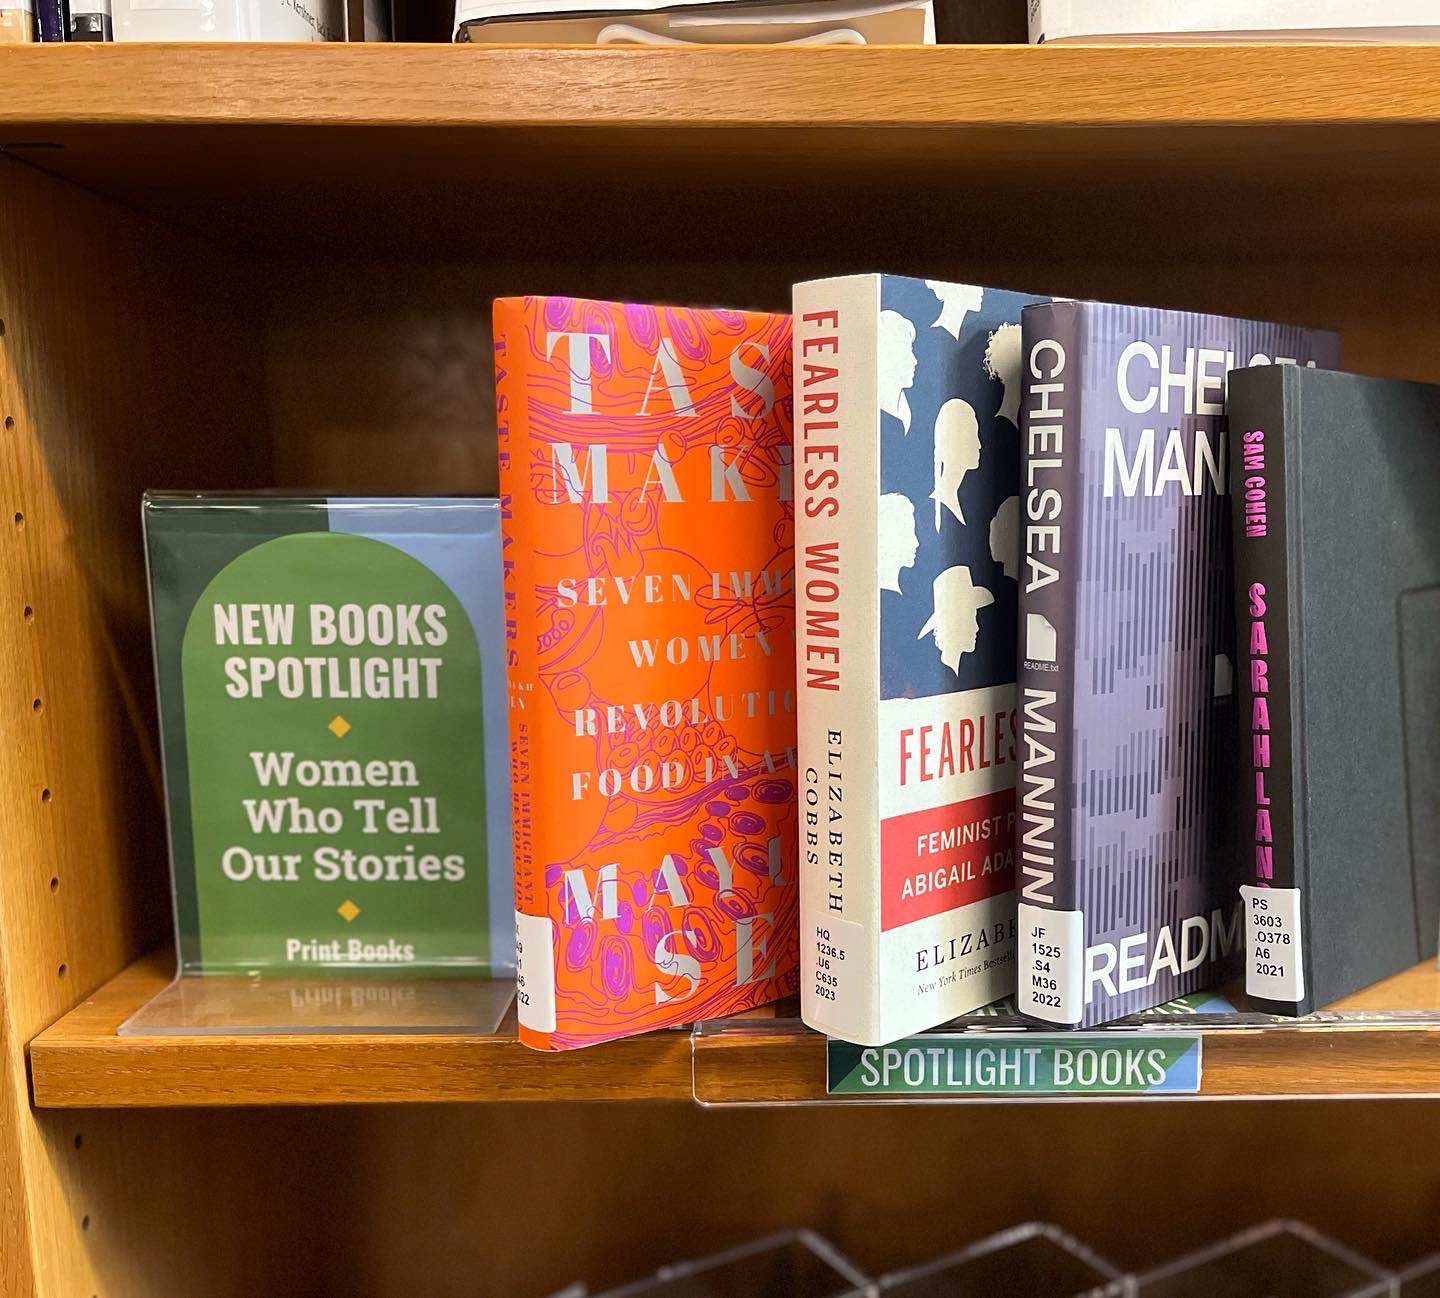 #NewBooksSpotlight Howe Library celebrates #WomensHistoryMonth with a two part spotlight on the women who tell our stories. Check out these titles and more on the new books shelf or in the spotlight archive at the link in our bio! #uvm #uvmlibraries #newbooks #spotlight